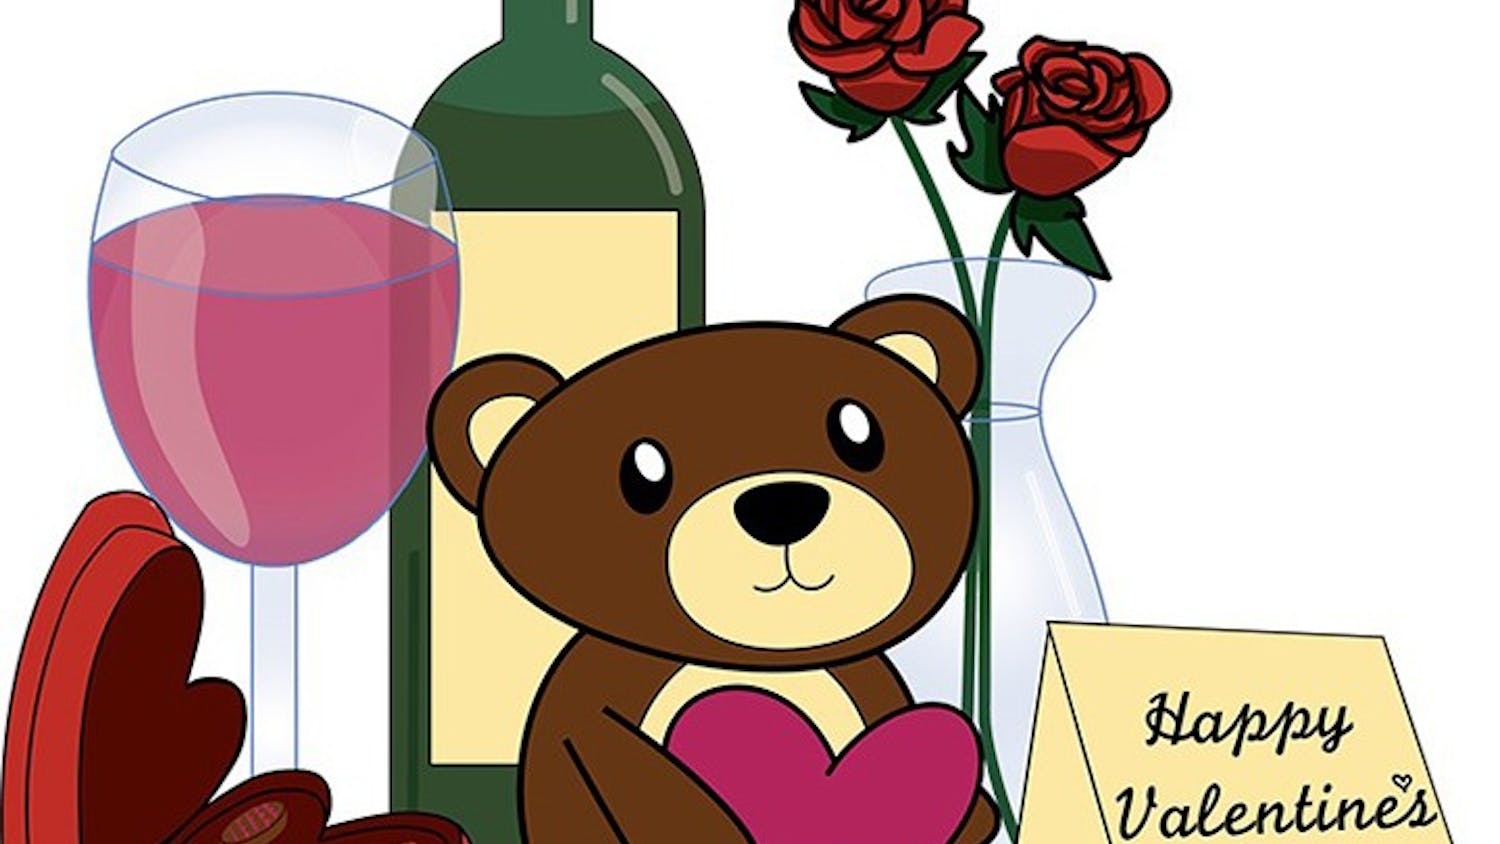 Traditional Valentines day items include stuffed animals, wine, chocolates and flowers. These materialistic items have become a staple of the holiday.&nbsp;